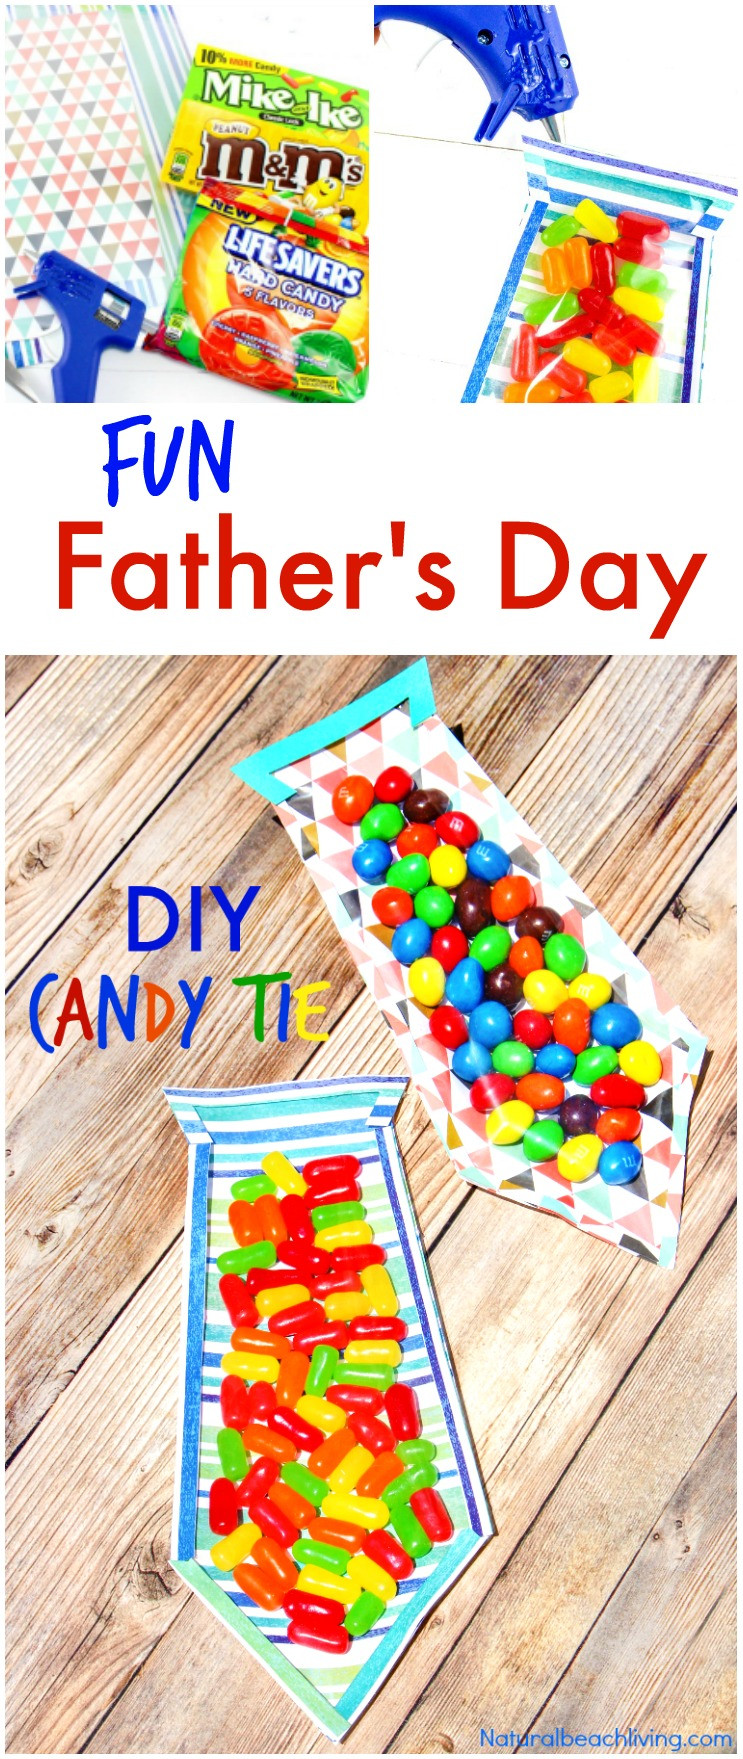 DIY Father'S Day Gifts From Kids
 The Best DIY Father s Day Card Father s Day Candy Tie